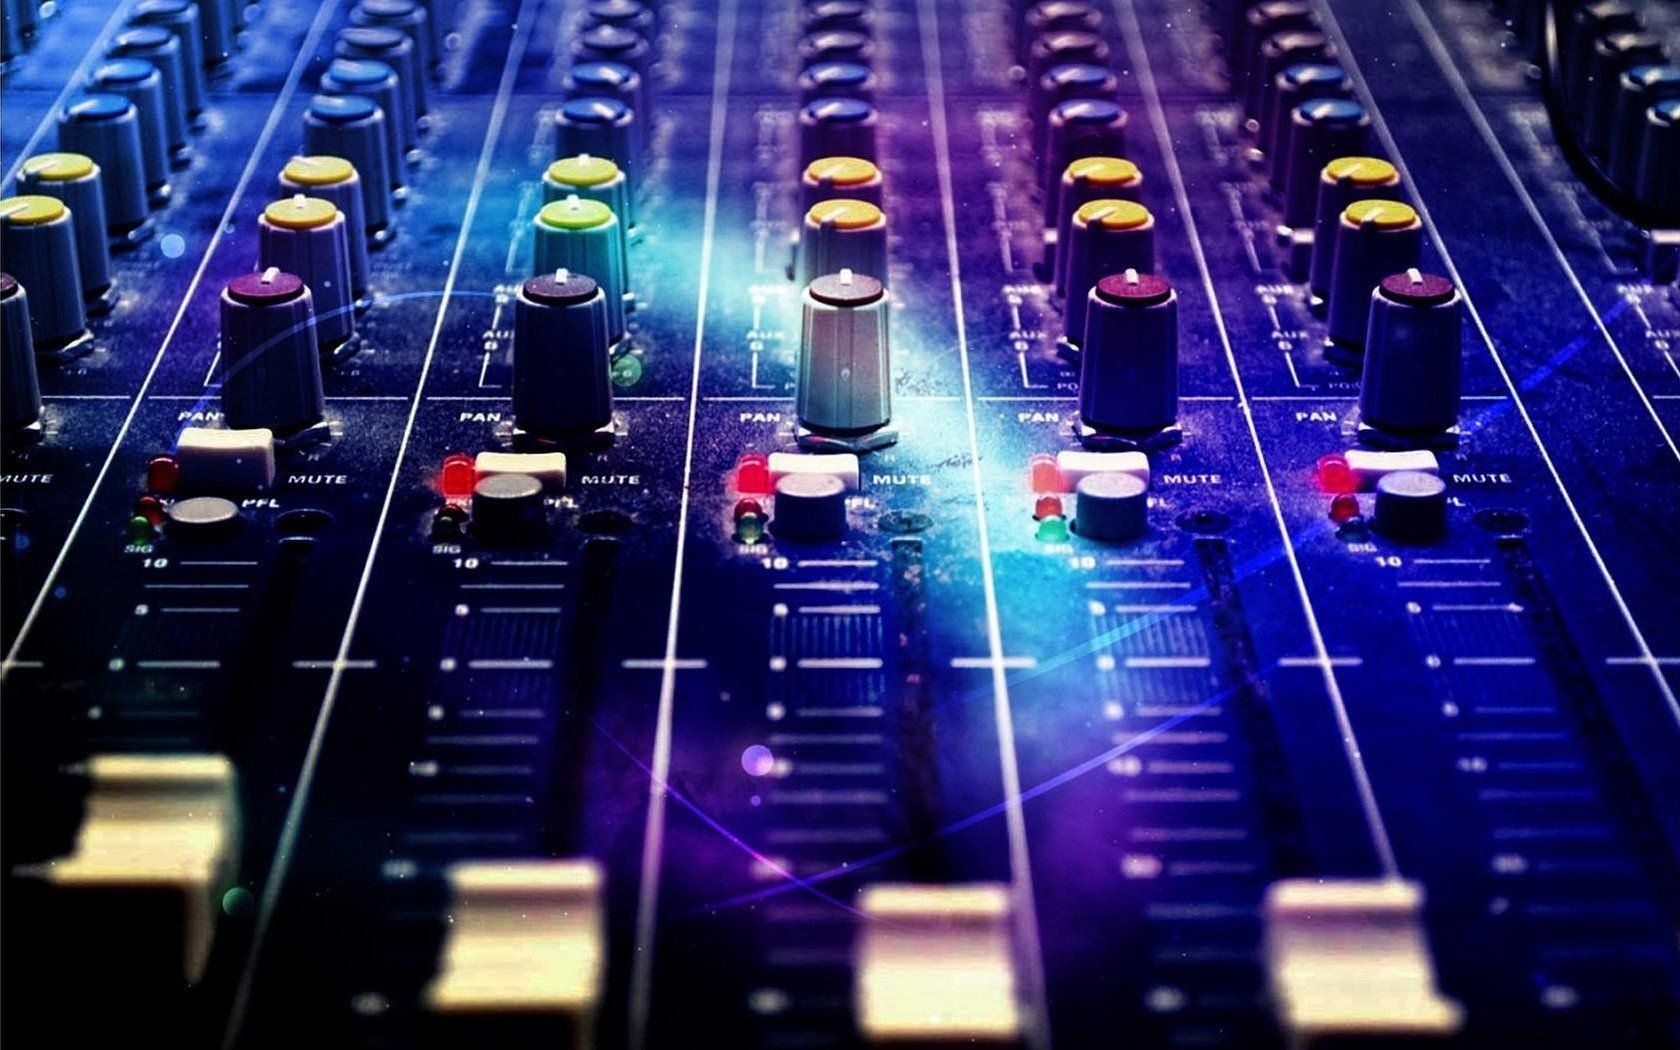 sound, Mixing consoles, Techno, Consoles Wallpaper HD / Desktop and Mobile Background